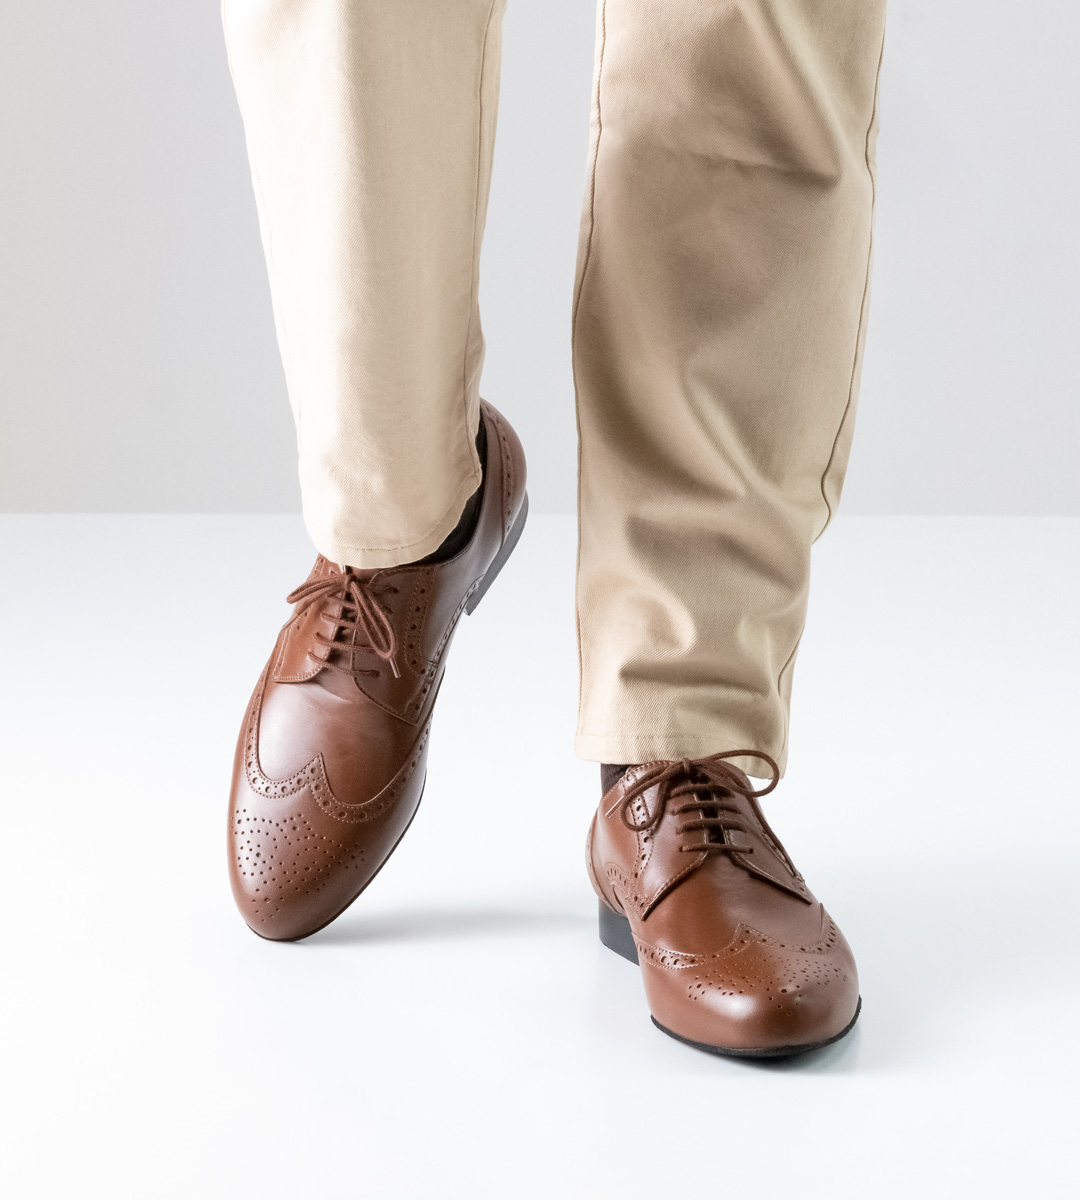 2 cm high men's dance shoe in nappa in combination with beige trousers